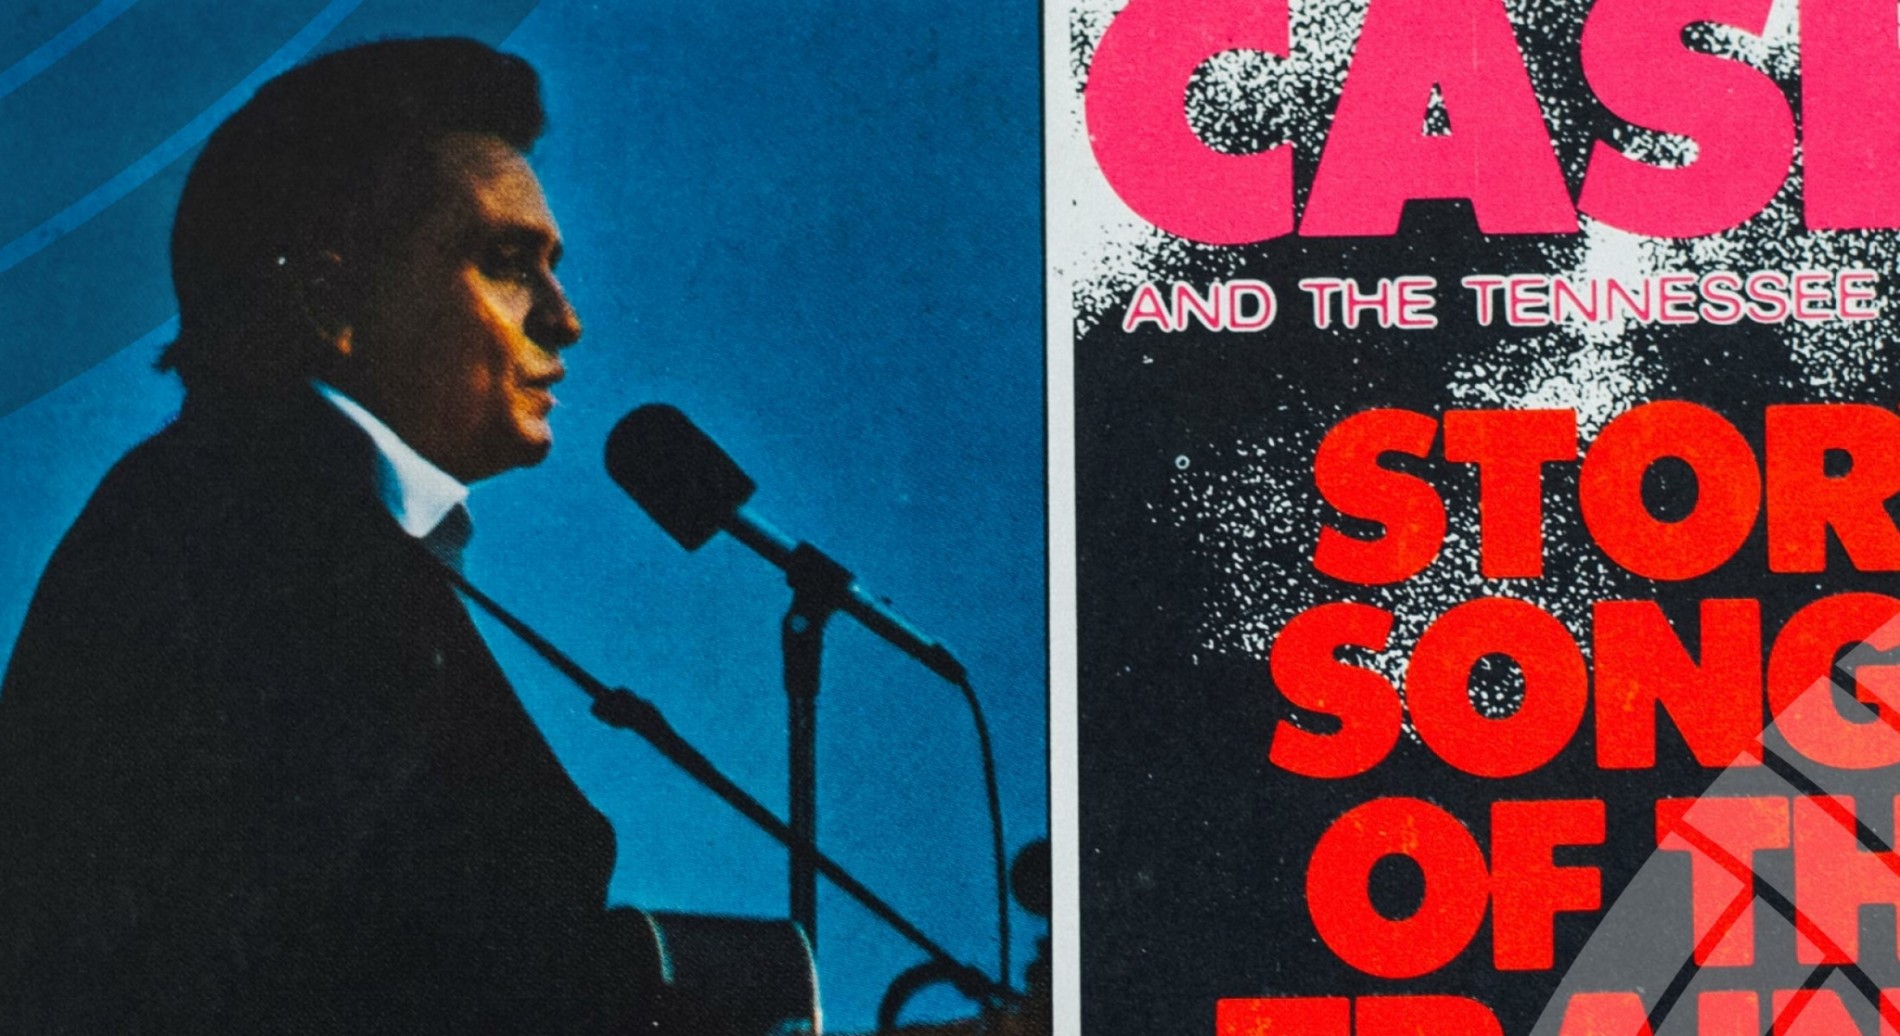 Neil Diamond & Johnny Cash Tribute - Tribute Show & 3 Course Meal for Two (8th January 2022)